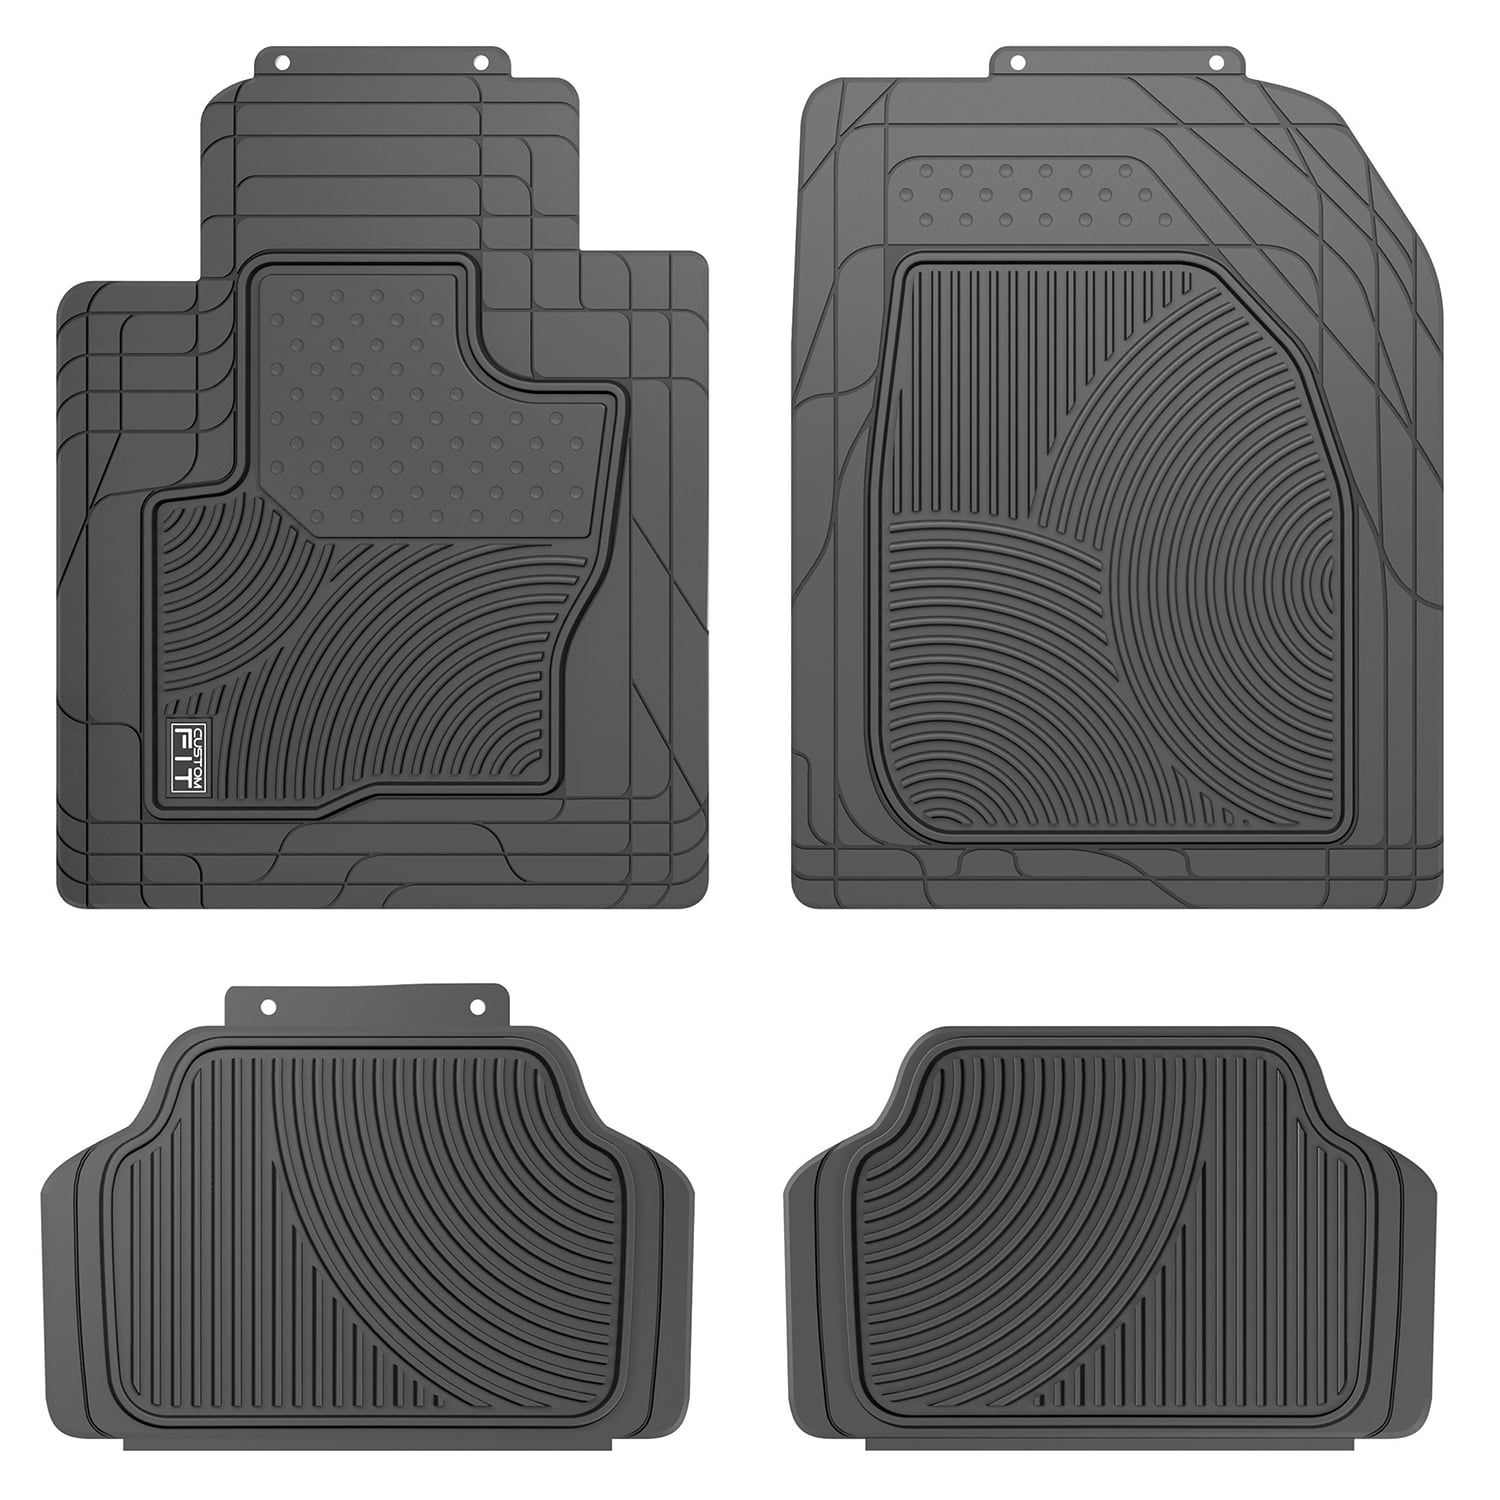 CAT ToughRide Heavy-Duty Piece Rubber Floor Mats For Car Truck Van SUV,  Gray – Odorless Trim To Fit Car Floor Mats, All Weather Deep Dish  Automotive